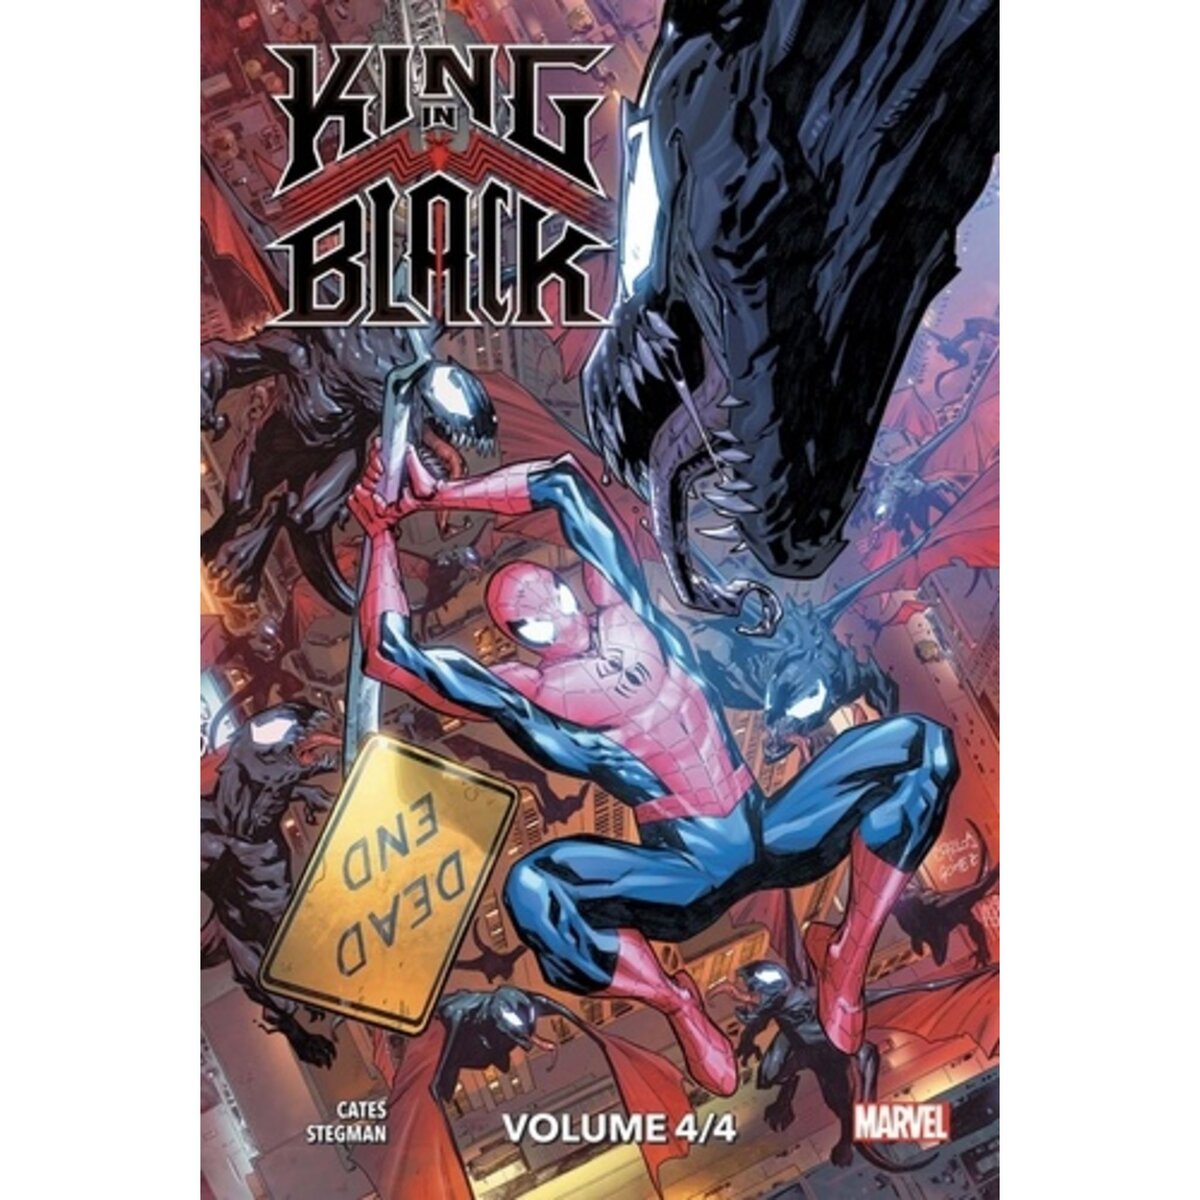  KING IN BLACK TOME 4 . EDITION COLLECTOR, Cates Donny